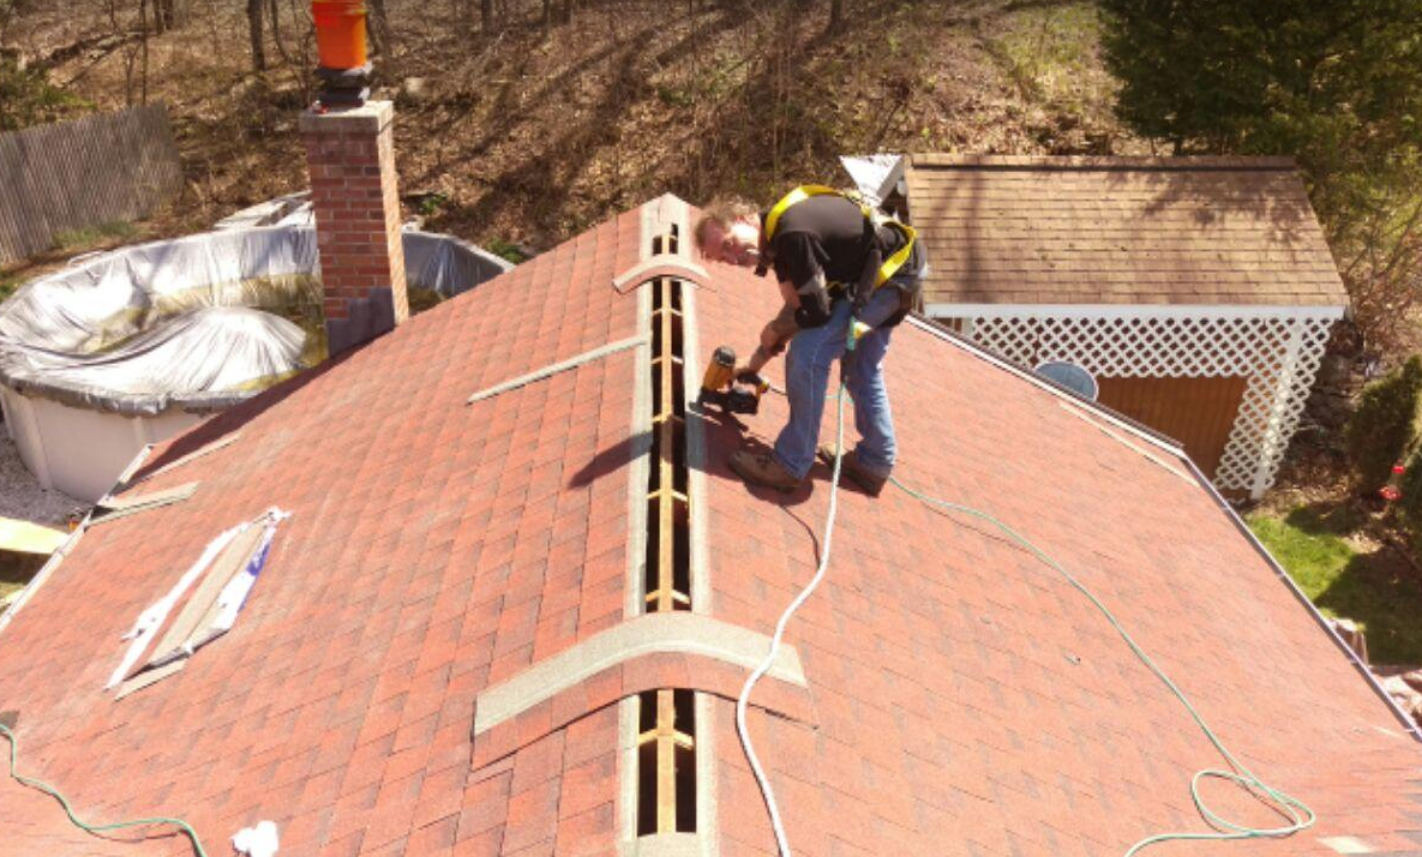 Unlimited Roofing & Restoration Photo